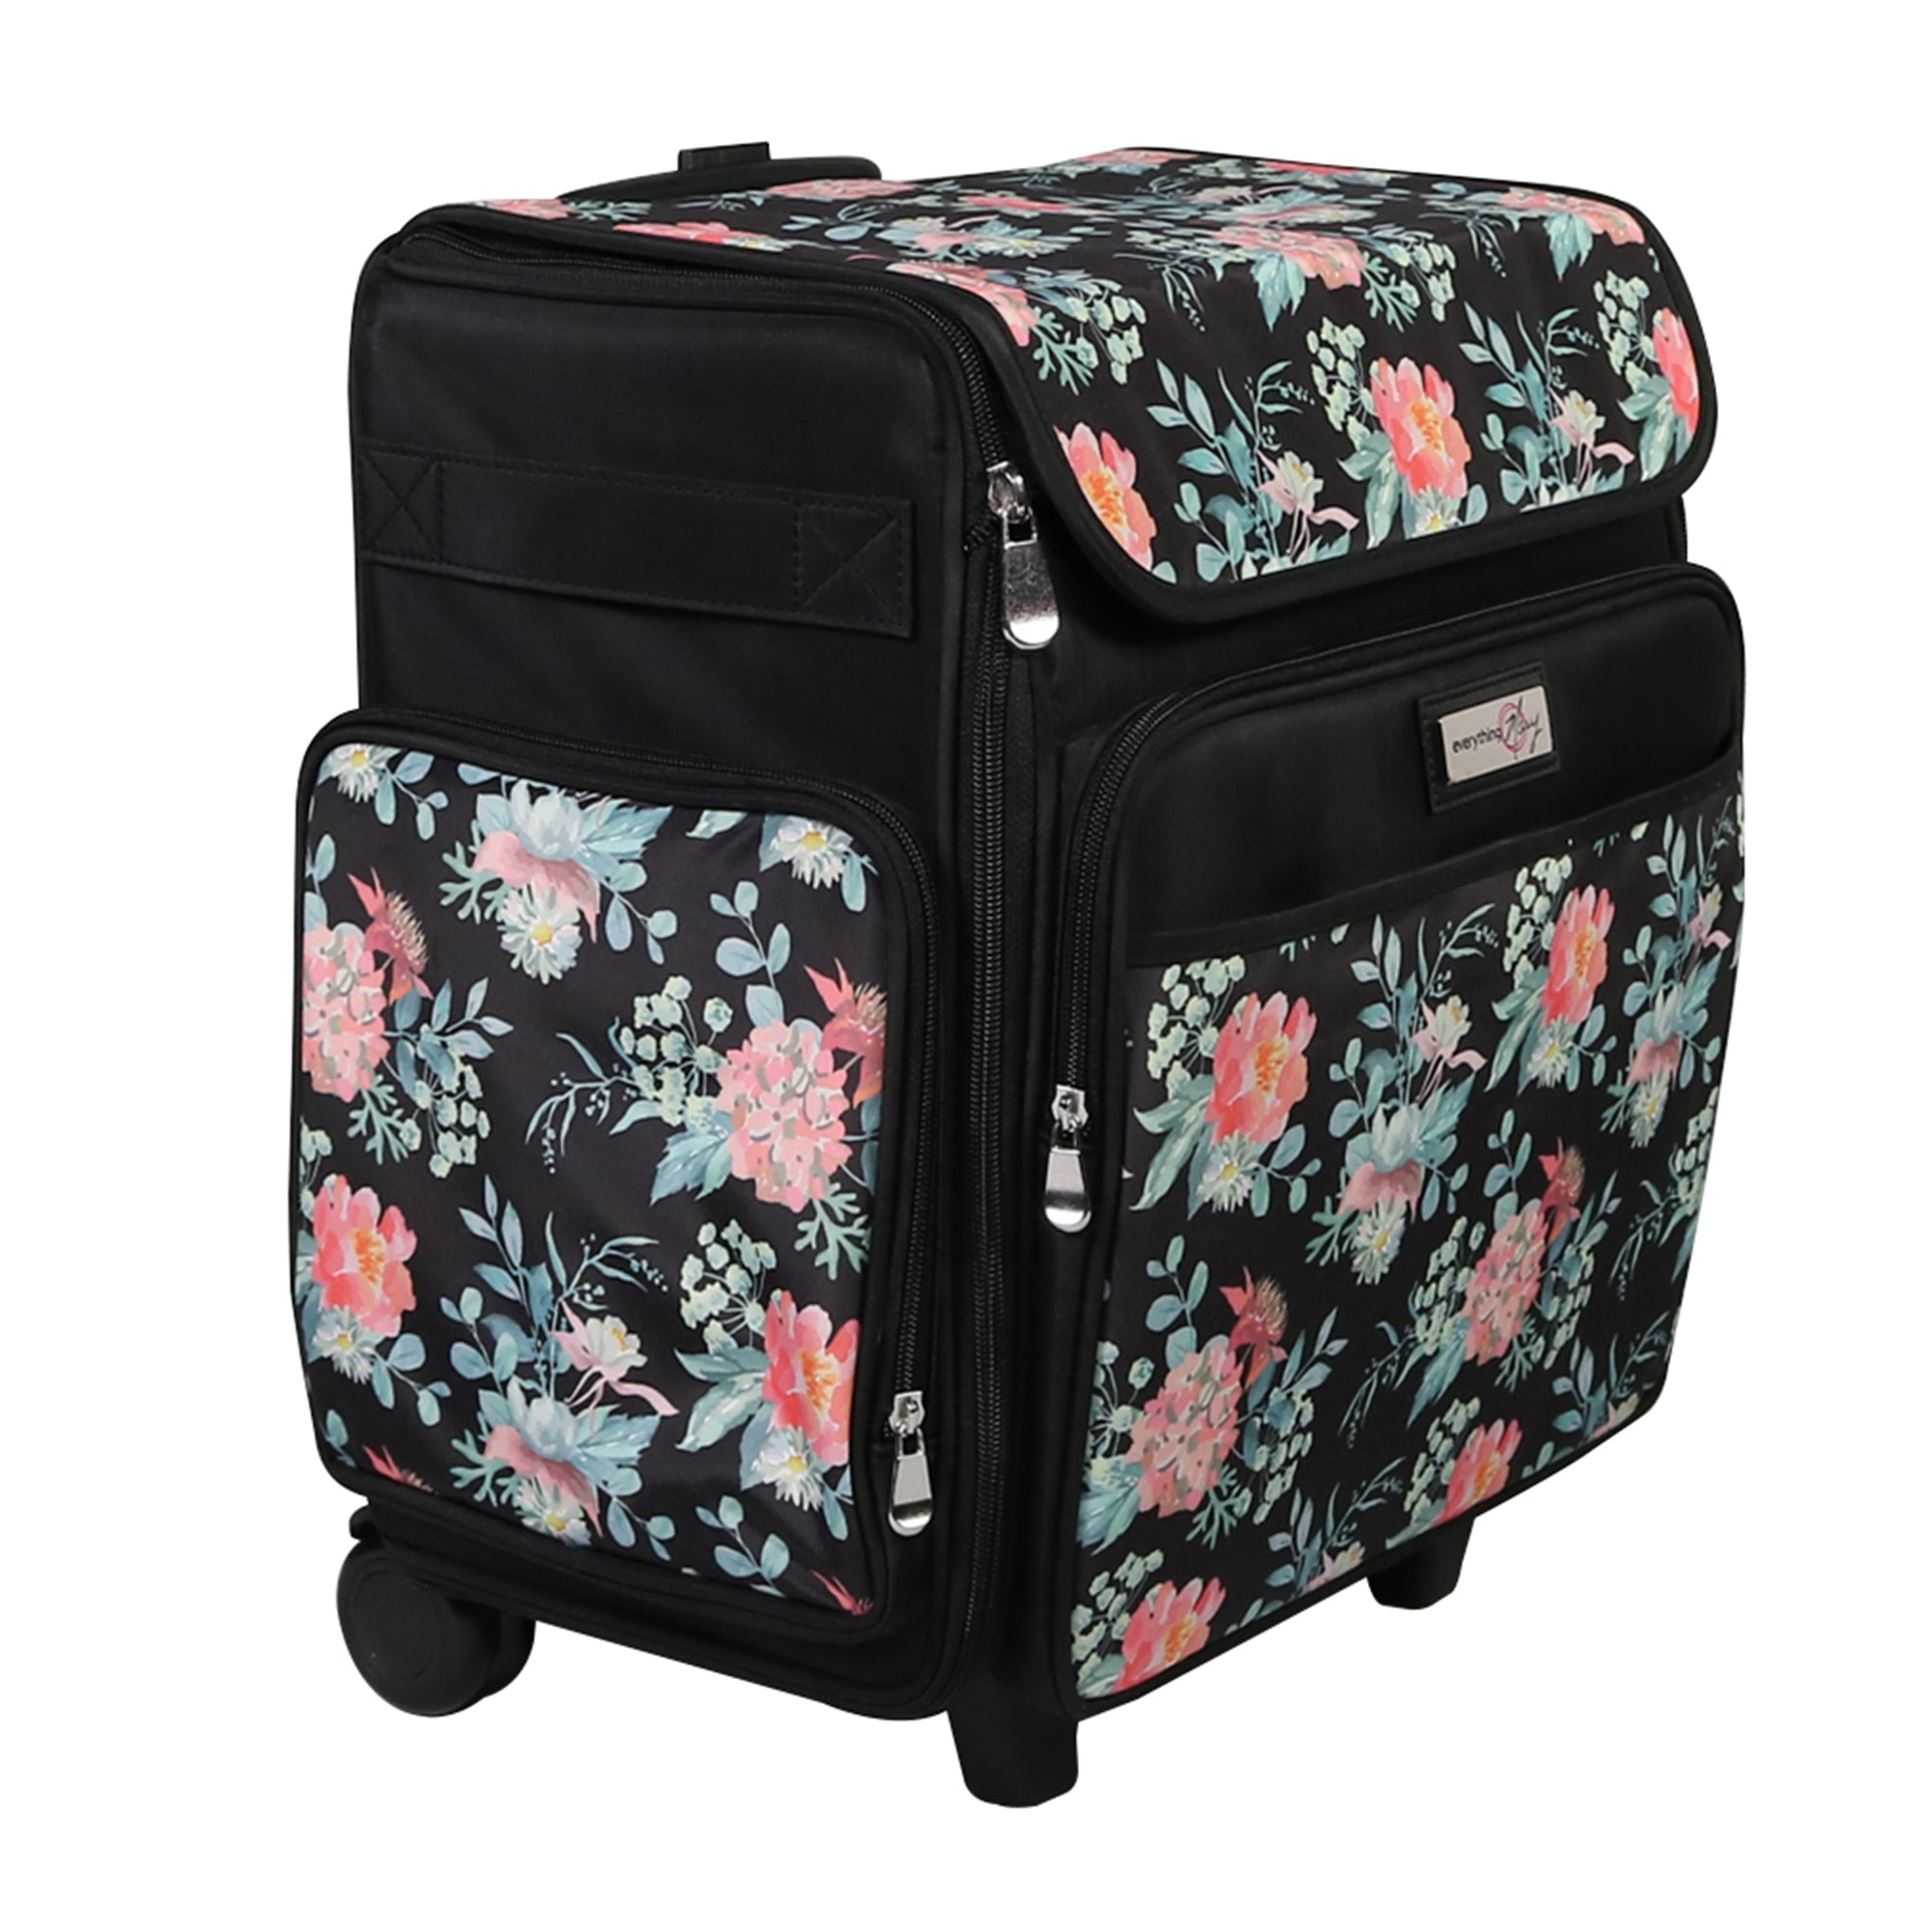  Everything Mary Black & Floral Rolling Scrapbook Storage Tote -  Scrapbooking Storage Case for Rings, Paper, Binder, Crafts, Beads, Scissors  - Telescoping Handle with Dual Wheels : Arts, Crafts & Sewing